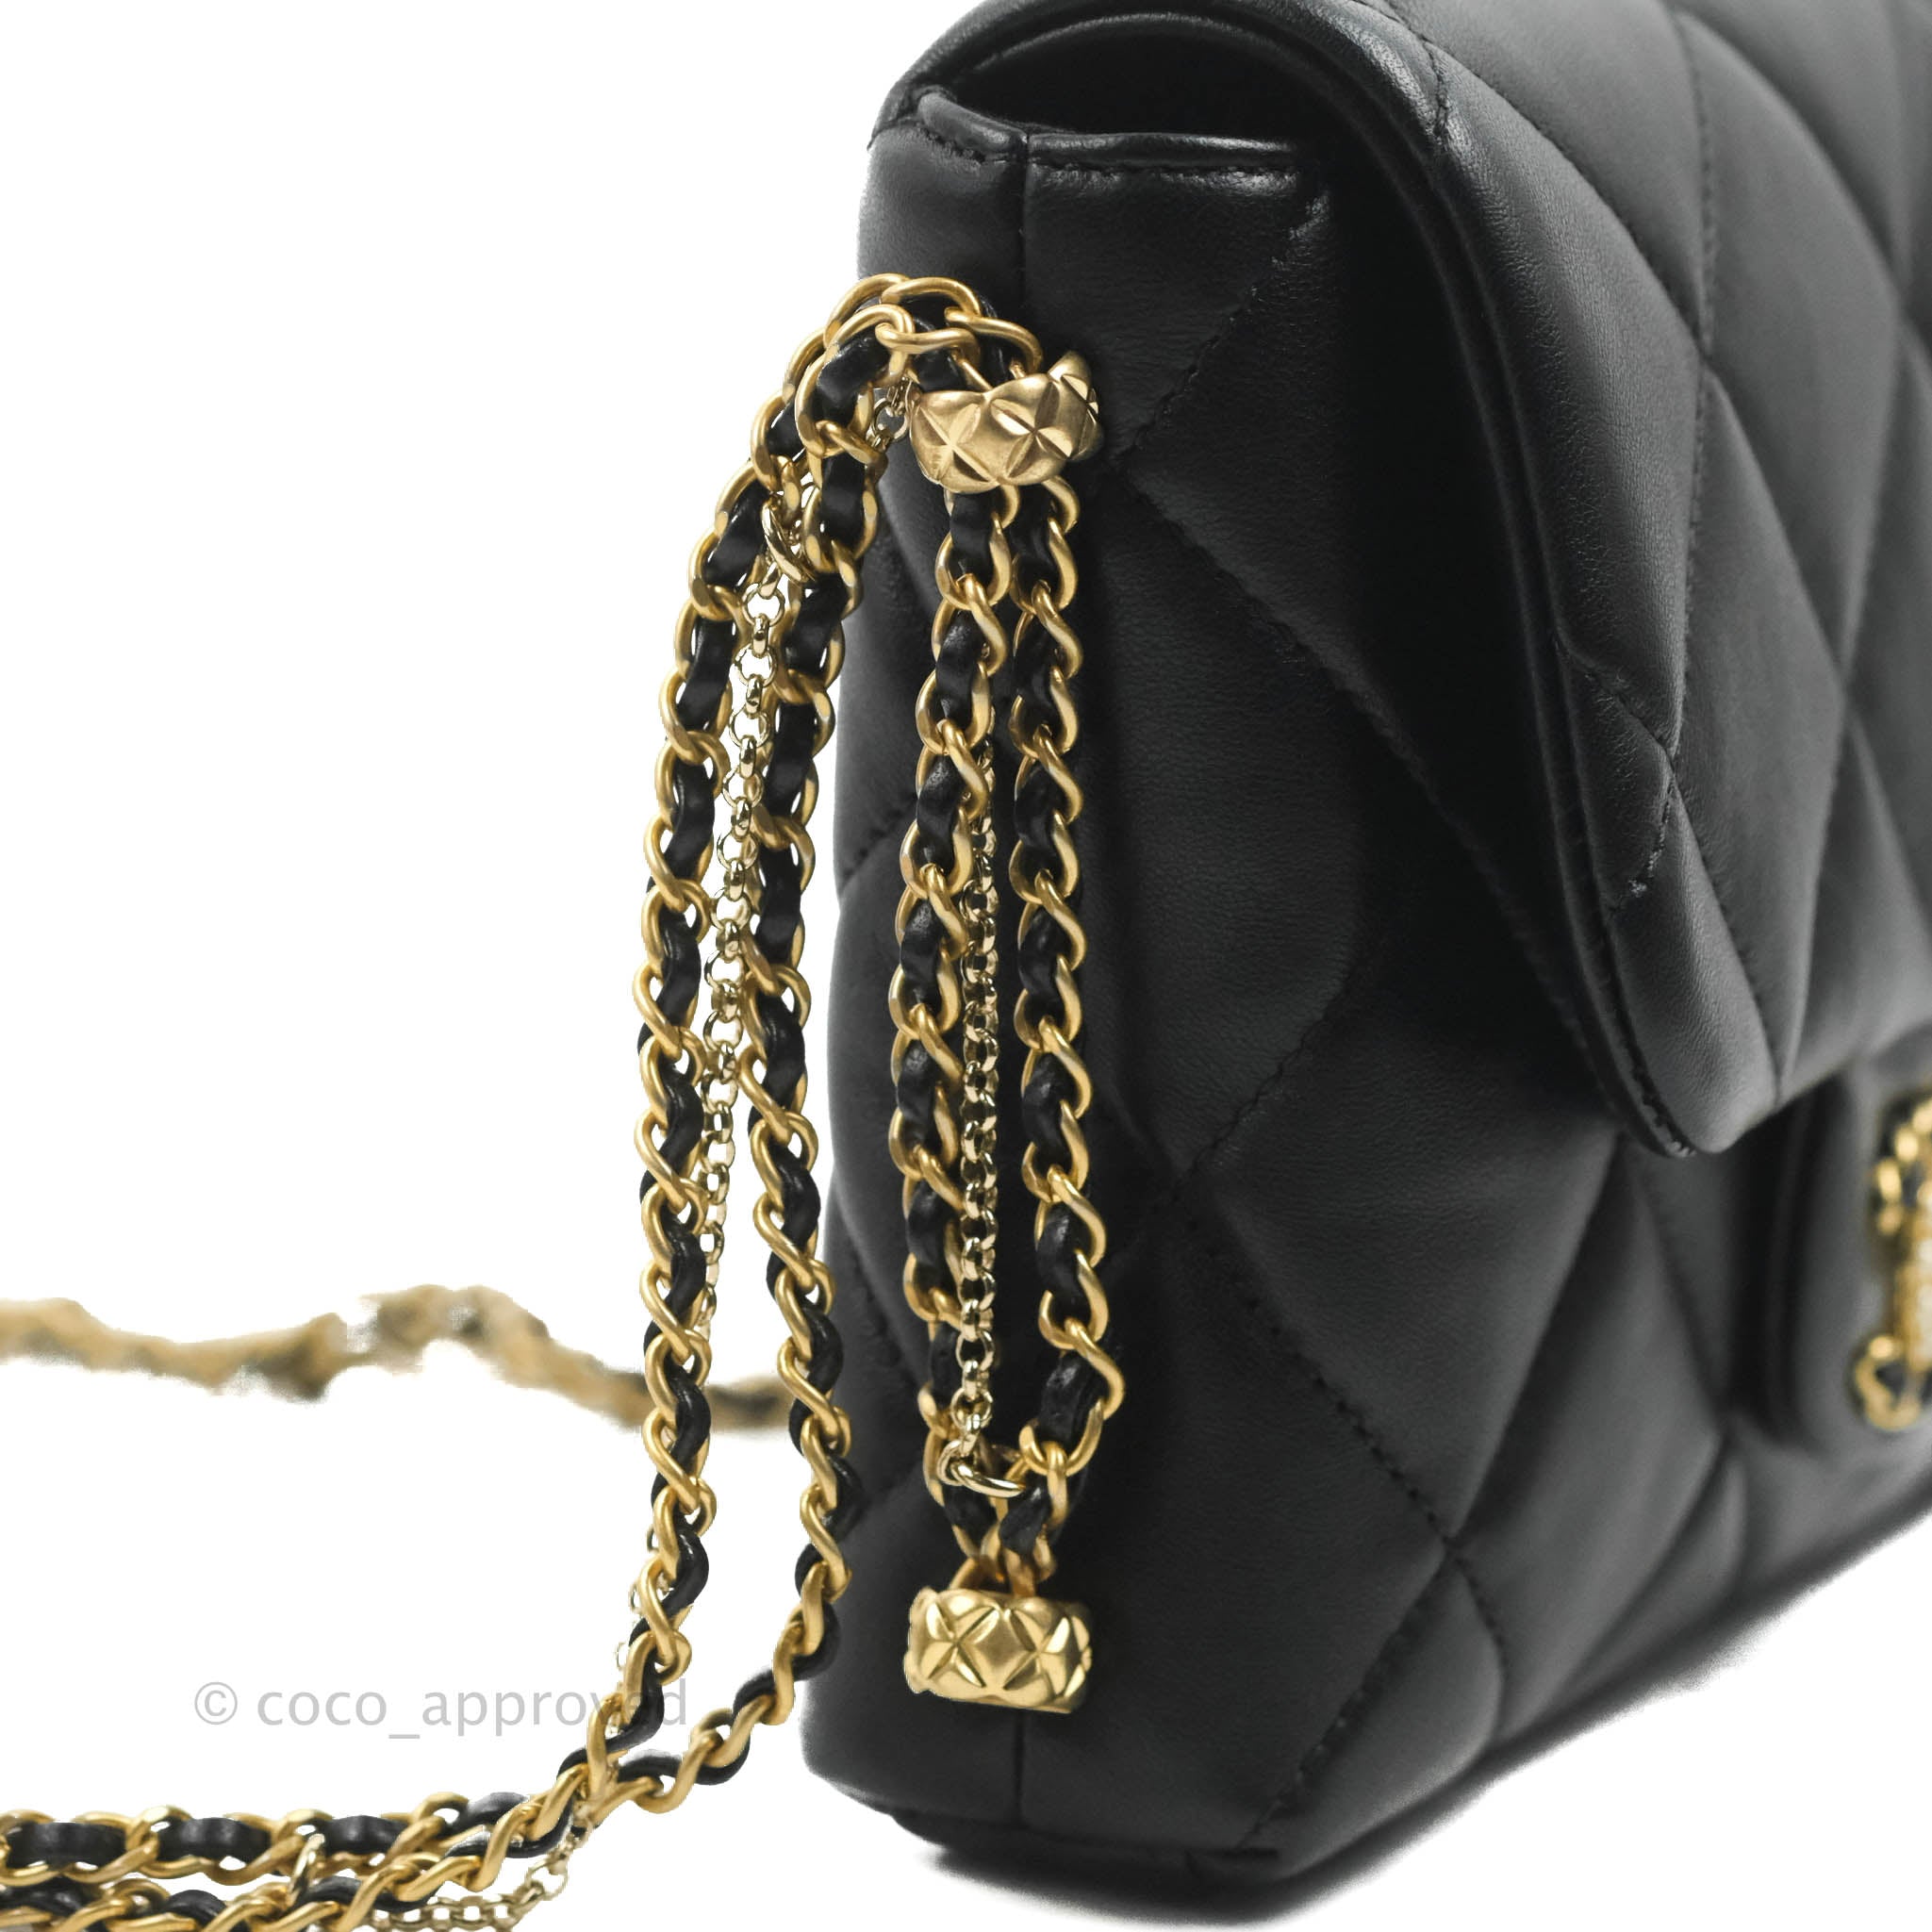 chanel purse with gold chain